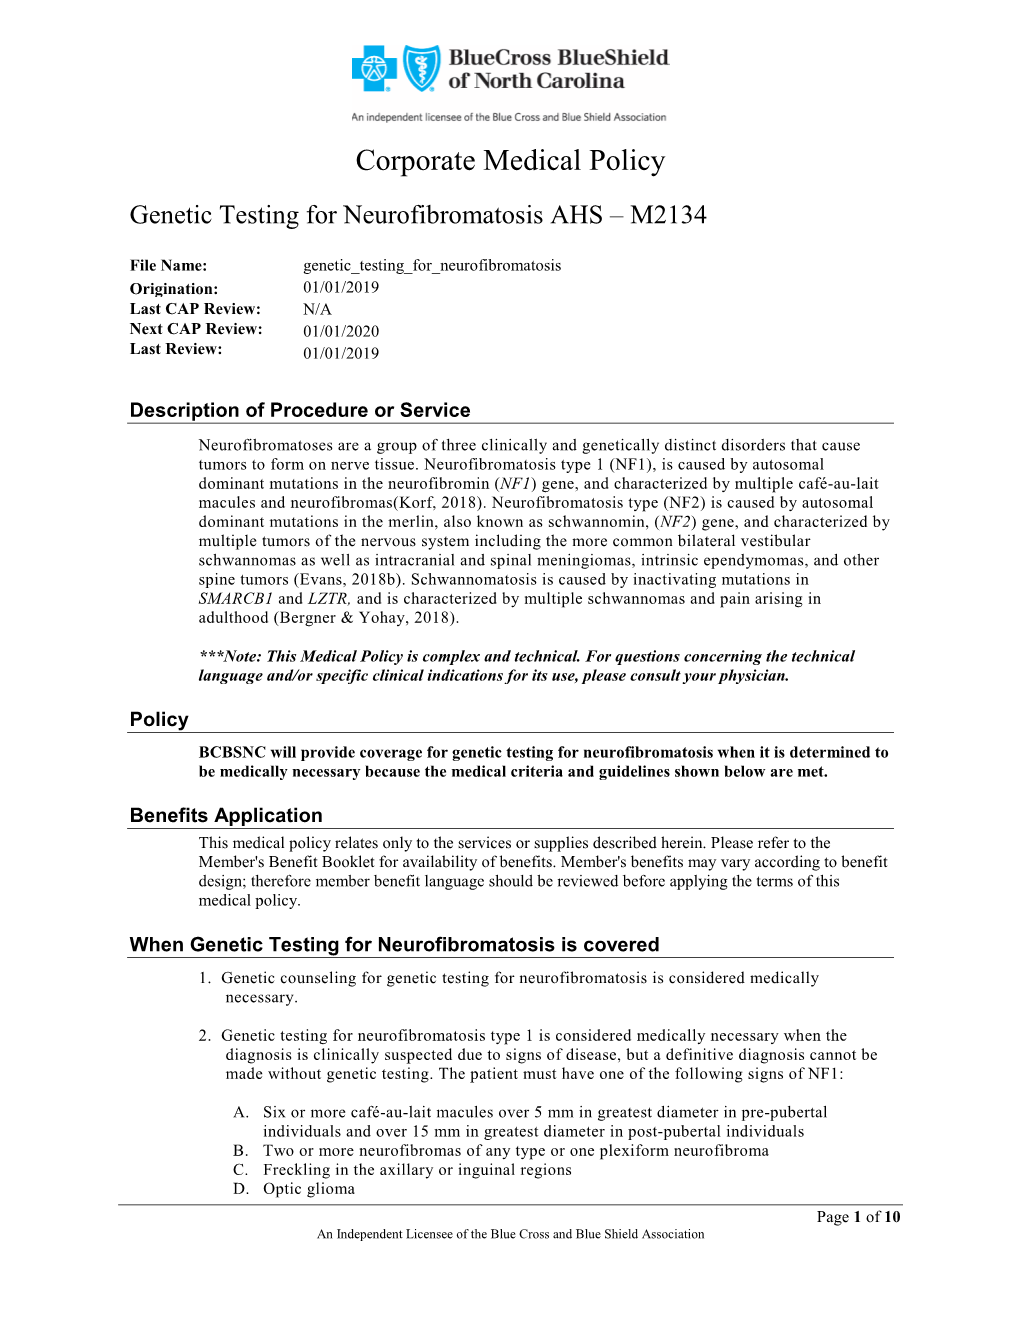 Corporate Medical Policy Template